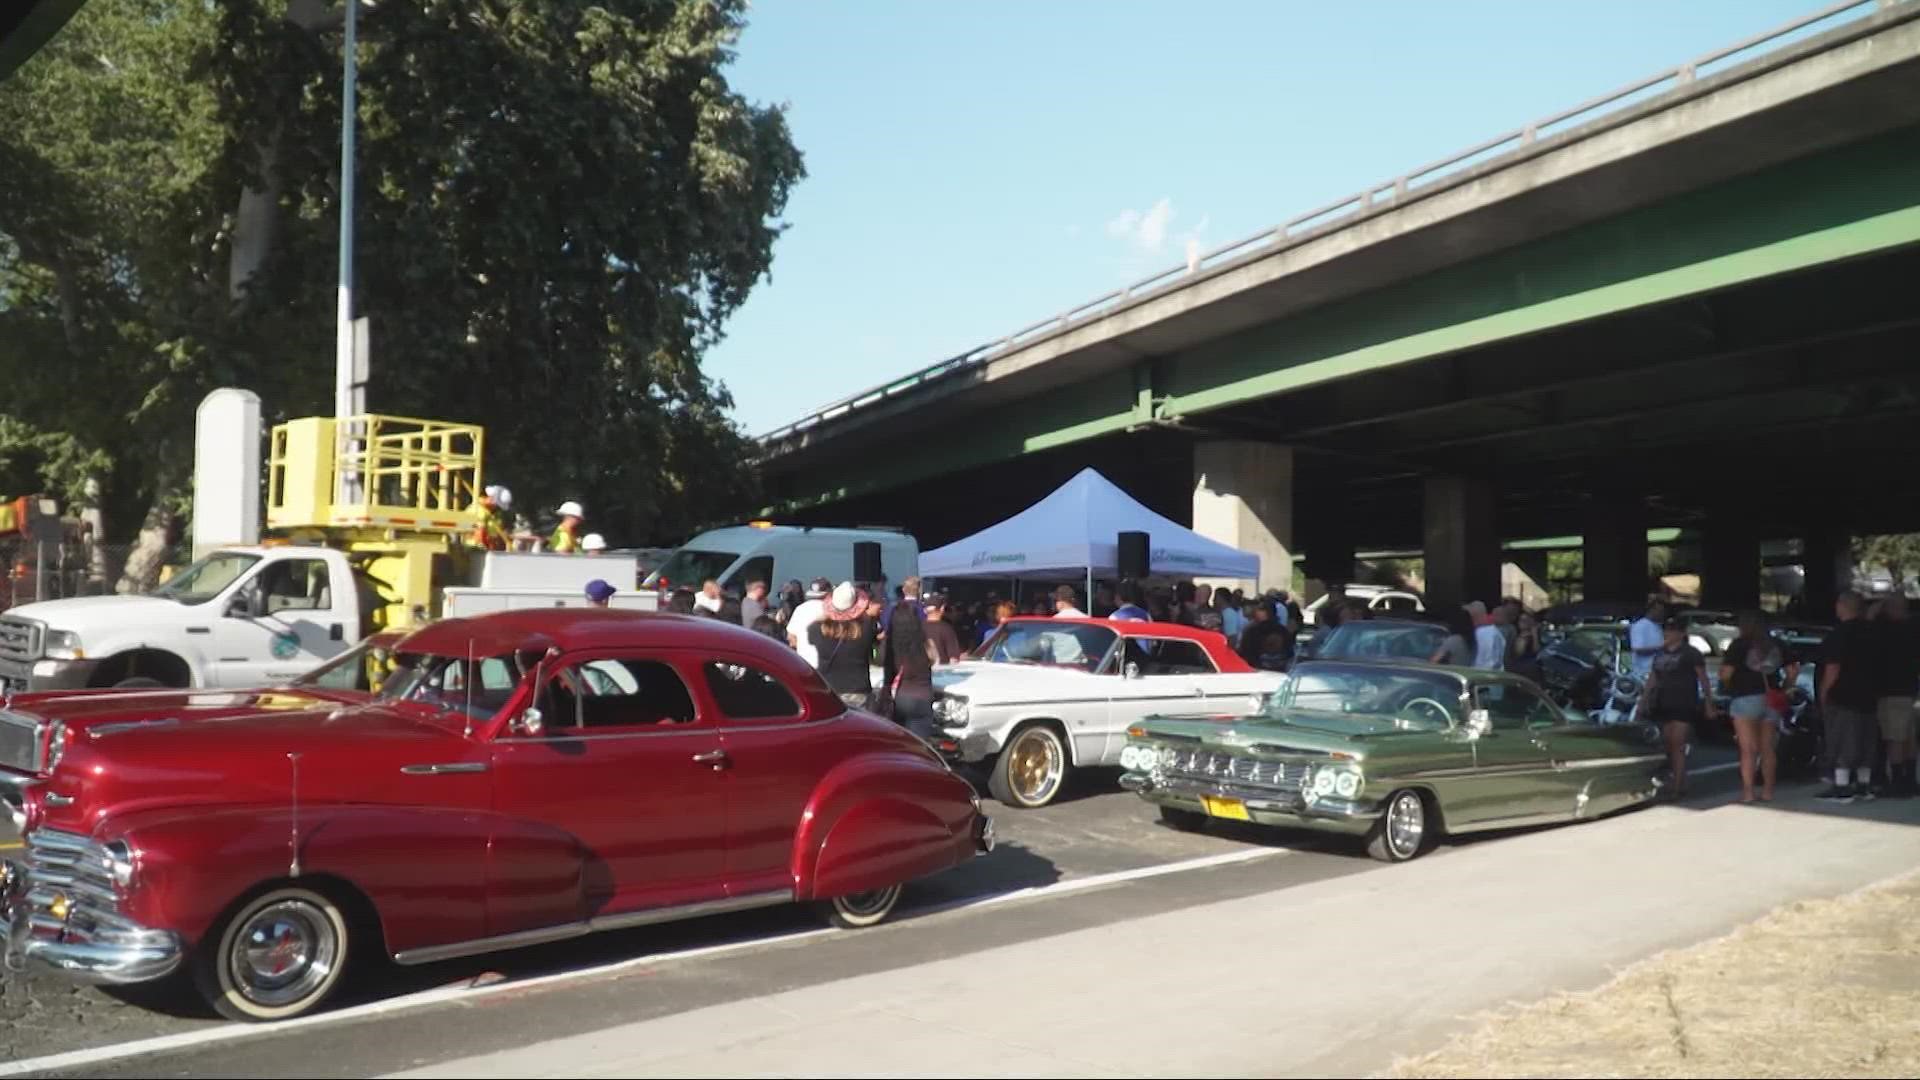 For many of Sacramento's lowriders cruising is more than just a thing you do,  vibrant, lovingly restored cars that can jump up and down the street, it’s culture.